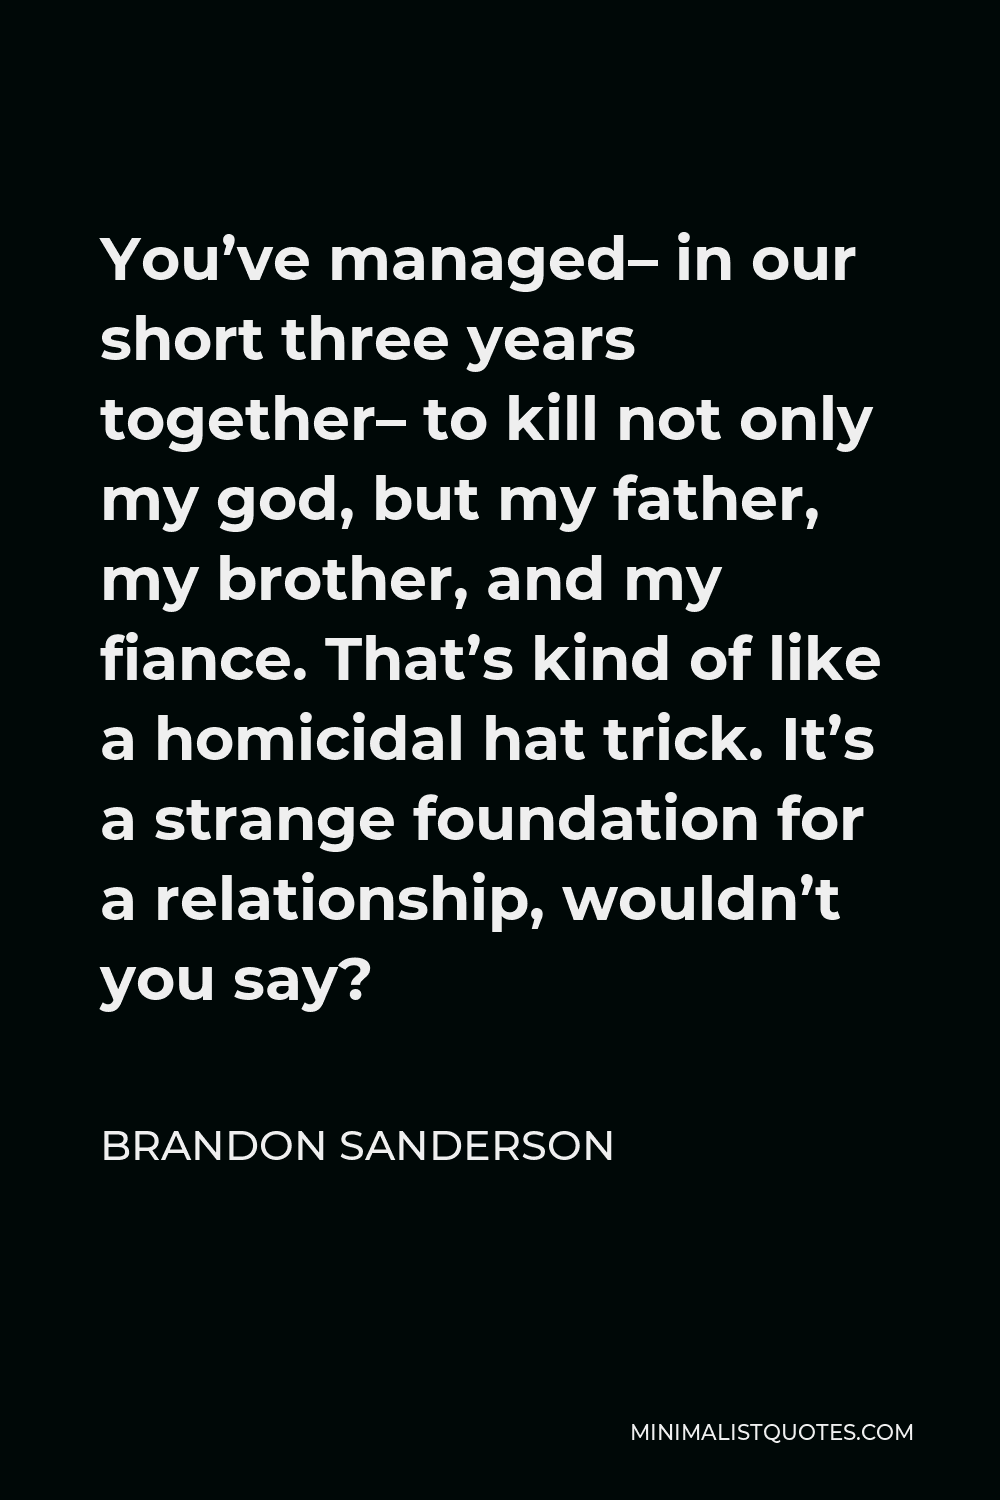 Brandon Sanderson Quote - You’ve managed– in our short three years together– to kill not only my god, but my father, my brother, and my fiance. That’s kind of like a homicidal hat trick. It’s a strange foundation for a relationship, wouldn’t you say?